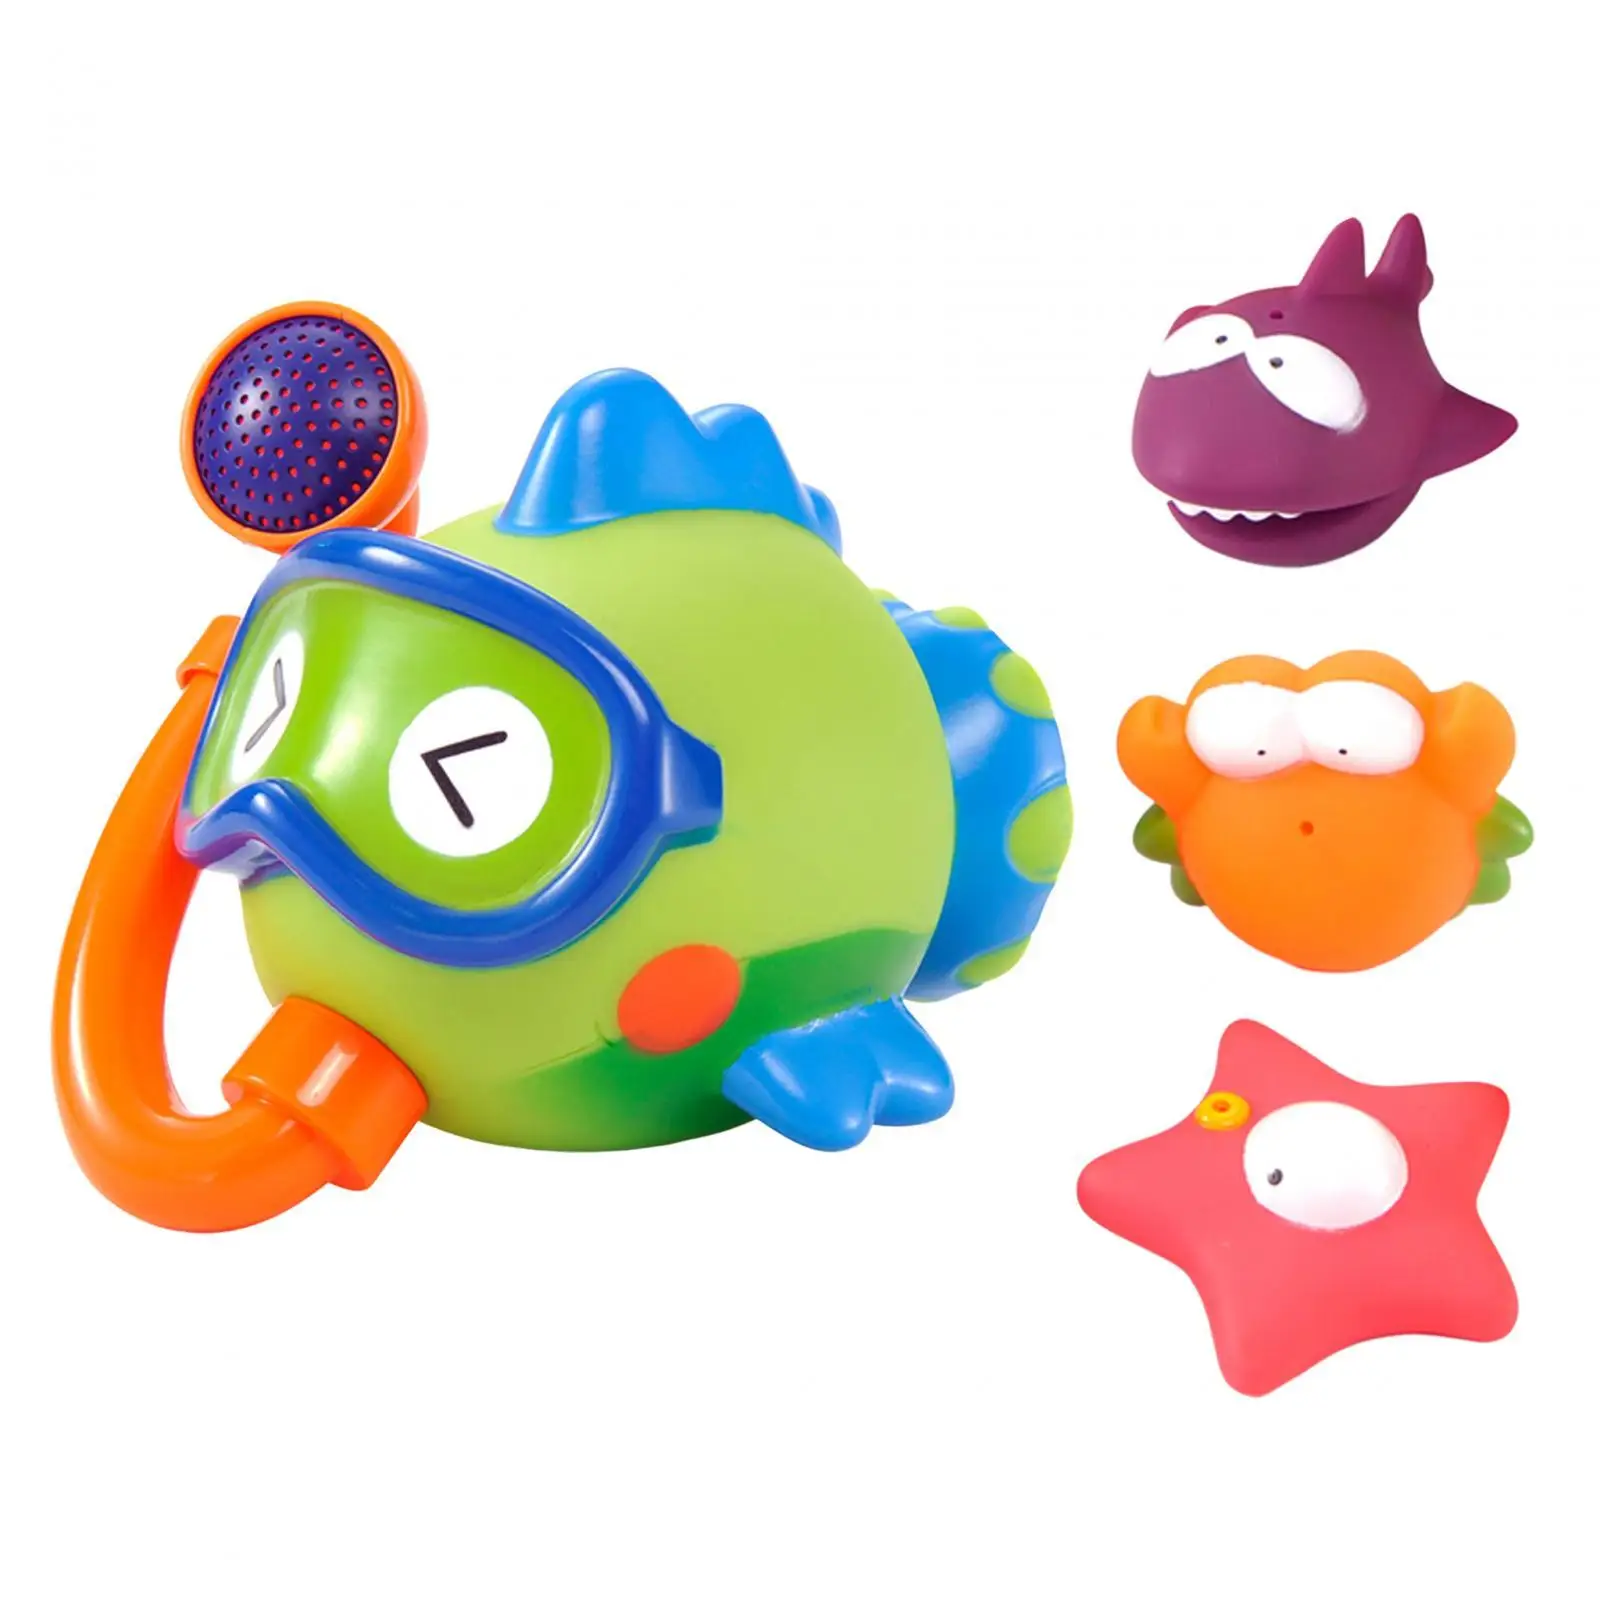 4Pcs Toddlers Bath Shower Toys Ocean Sea Animal Bathtub Toys Bath Tub Toys for Infants Kids Baby Toddlers Great Gifts